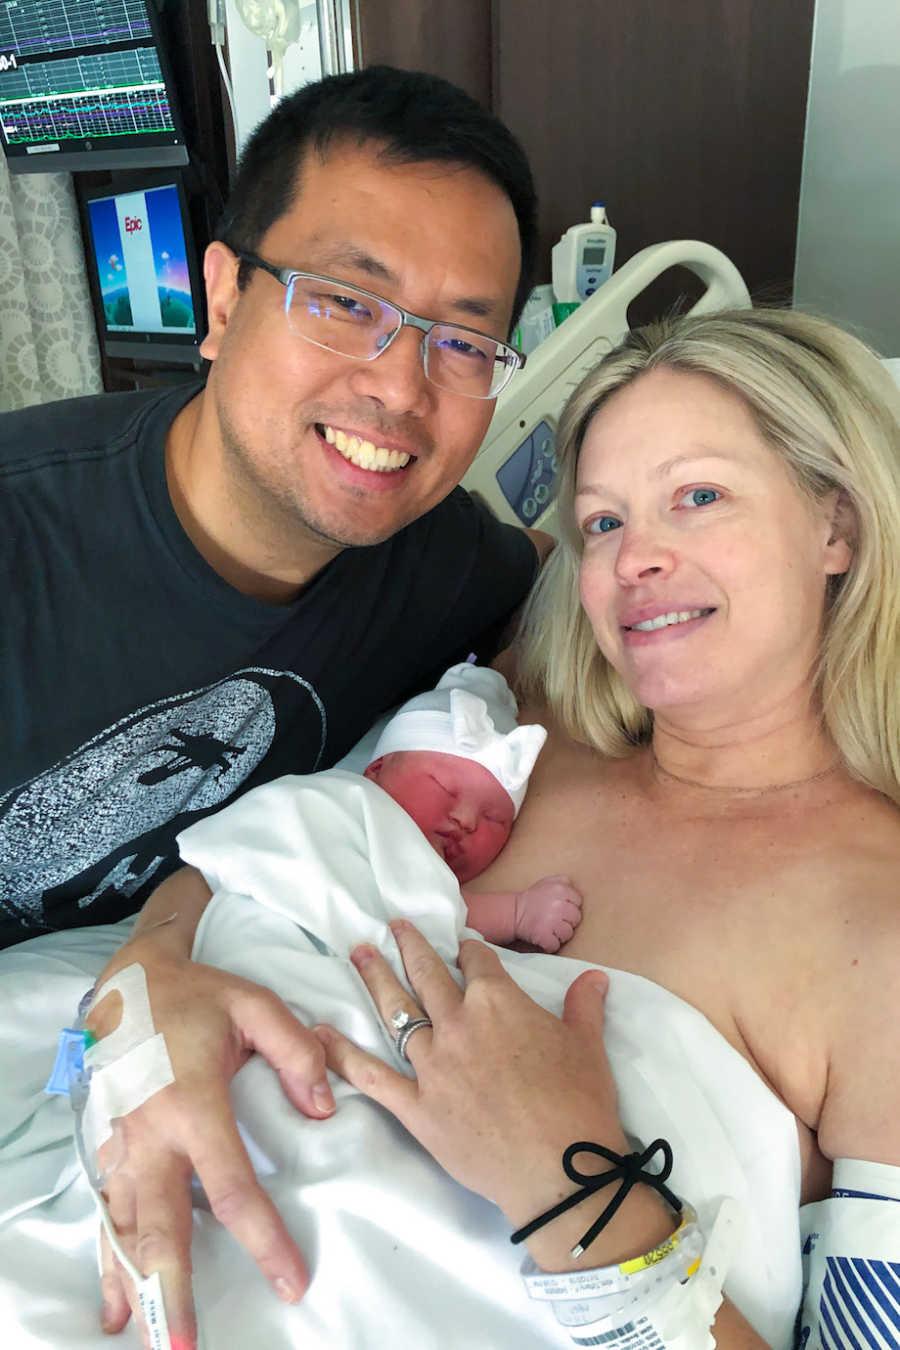 Paul Kim and Tiffany Kim with their newborn daughter, Arabella. (Courtesy of <a href="https://www.instagram.com/abellamiracle/">Abellamiracle</a>)